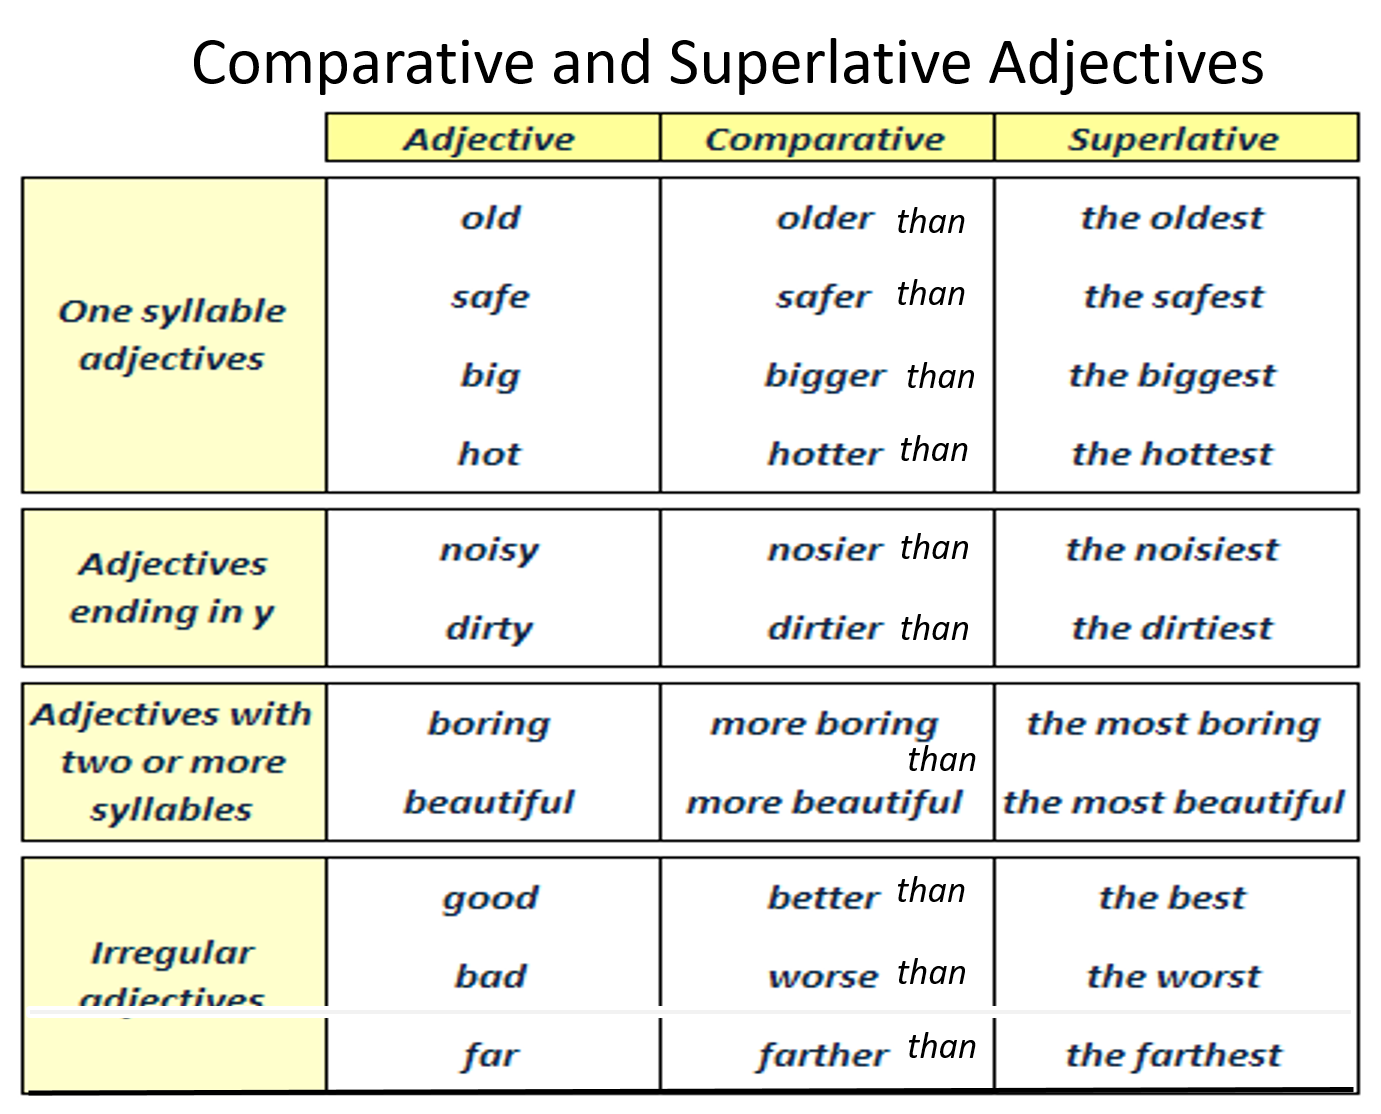 Dirty adjectives. Comparatives and Superlatives правило таблица. Comparative adjectives таблица. Таблица Comparative and Superlative. Comparatives and Superlatives правило.